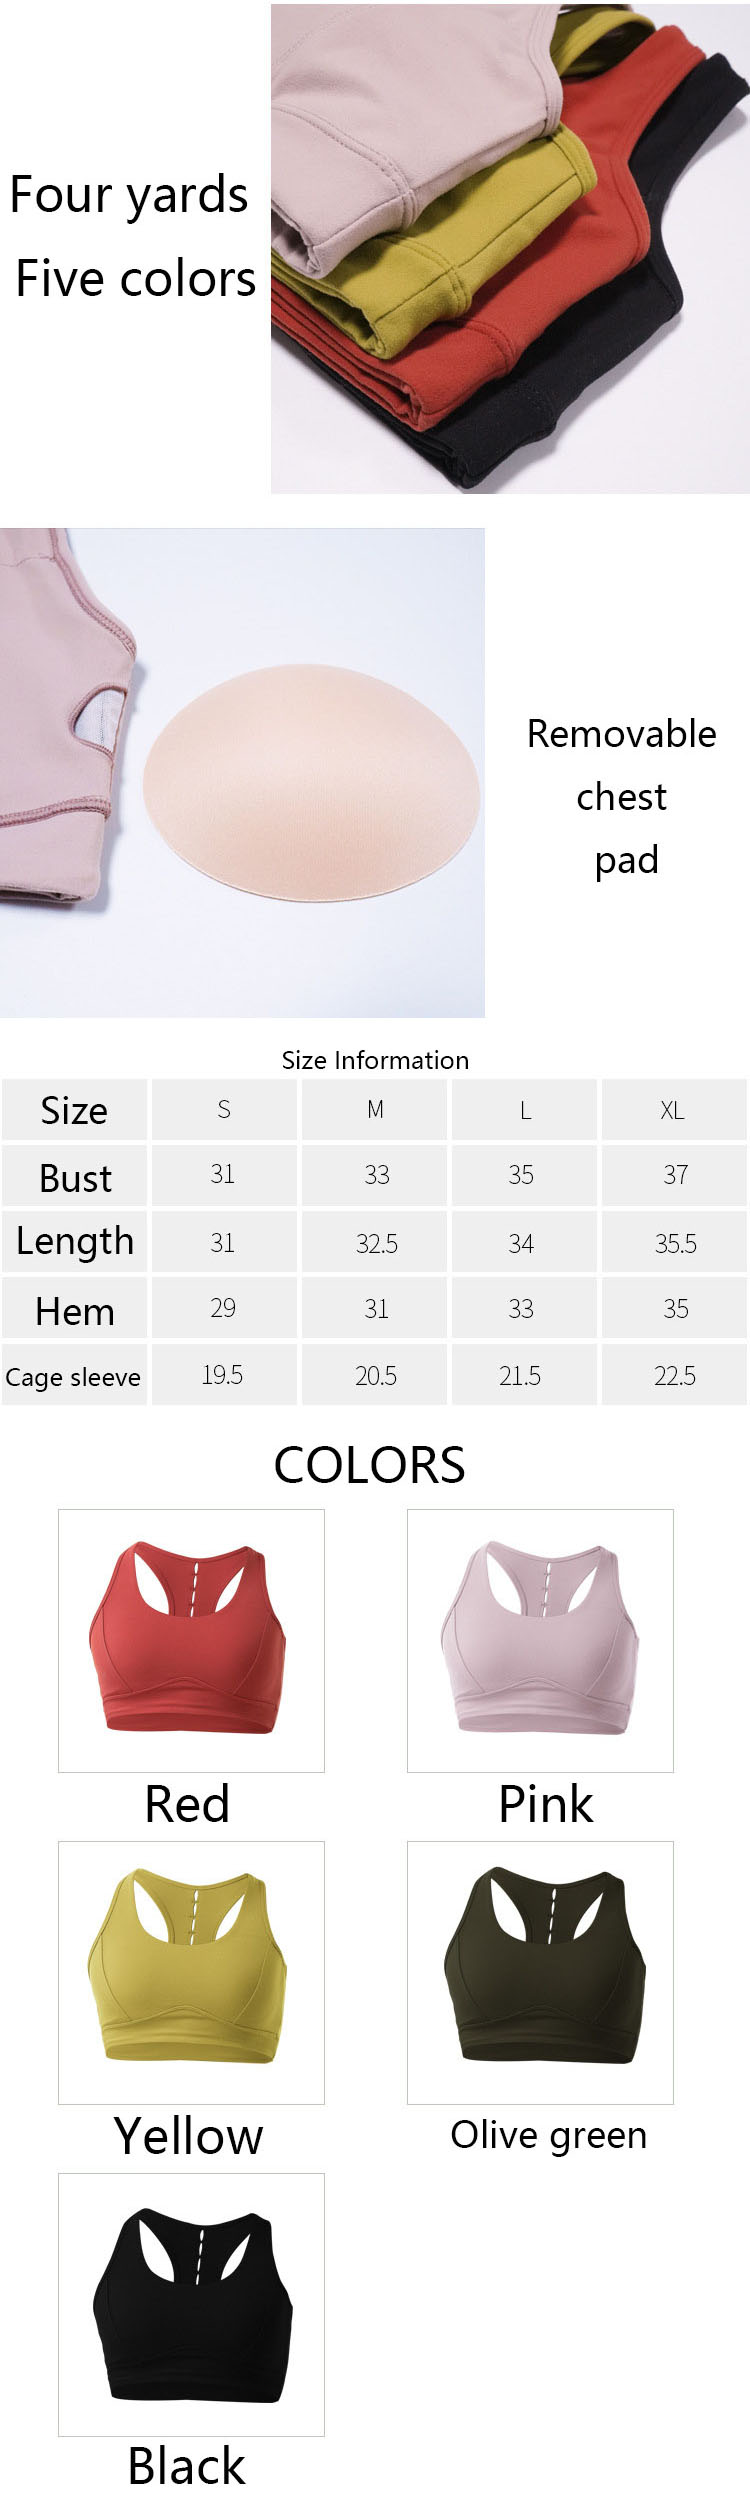 Red sports bra features